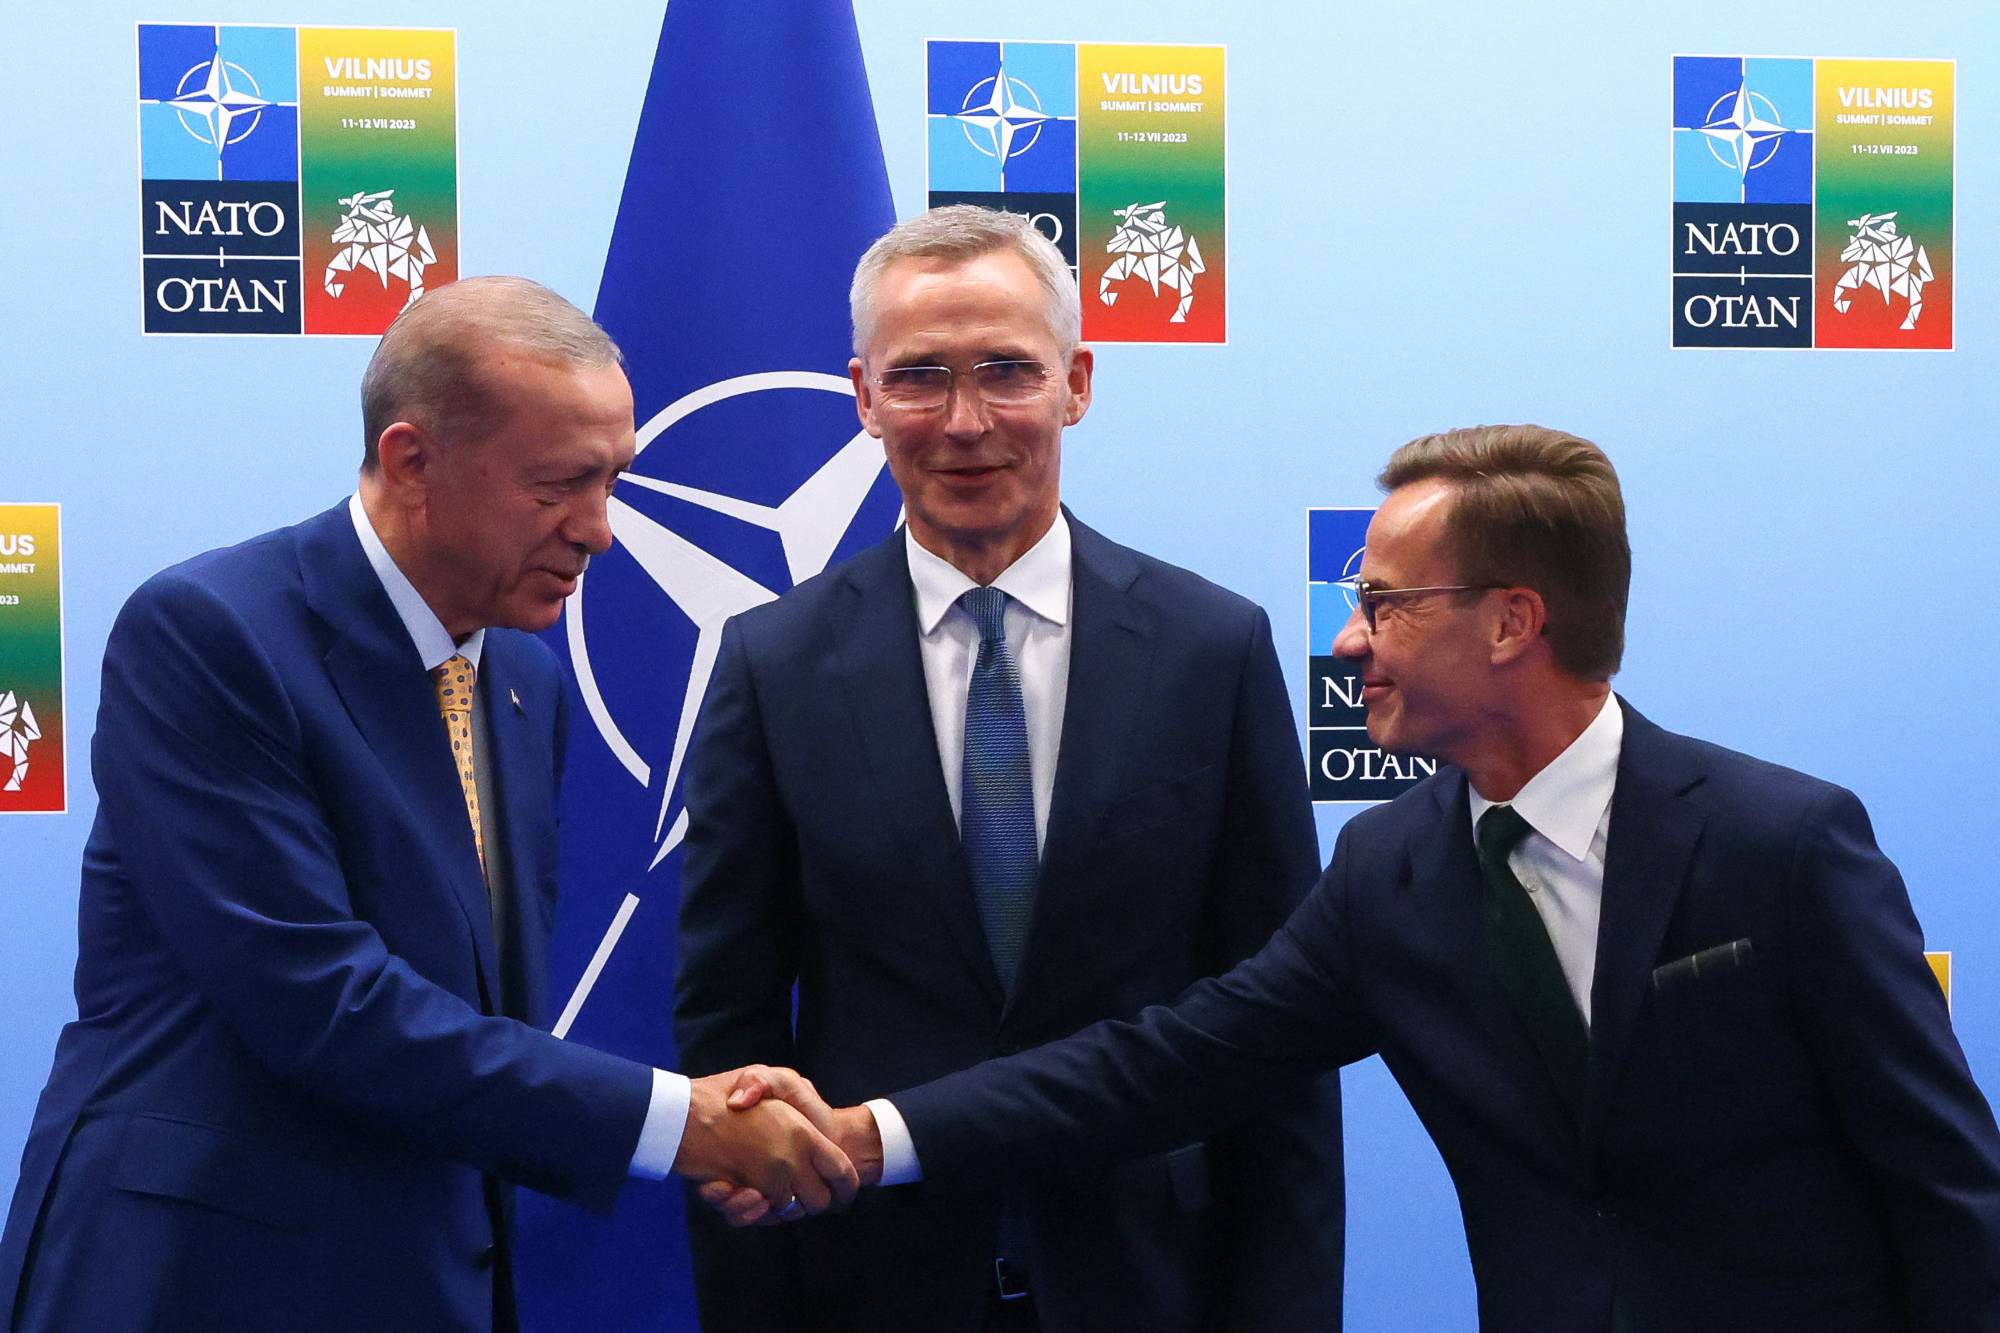 Turkish President Recep Tayyip Erdogan and Swedish Prime Minister Ulf Kristersson shake hands next to NATO Secretary-General Jens Stoltenberg prior to their meeting, on the eve of a NATO summit, in Vilnius, Lithuania, on Monday. | POOL / VIA REUTERS